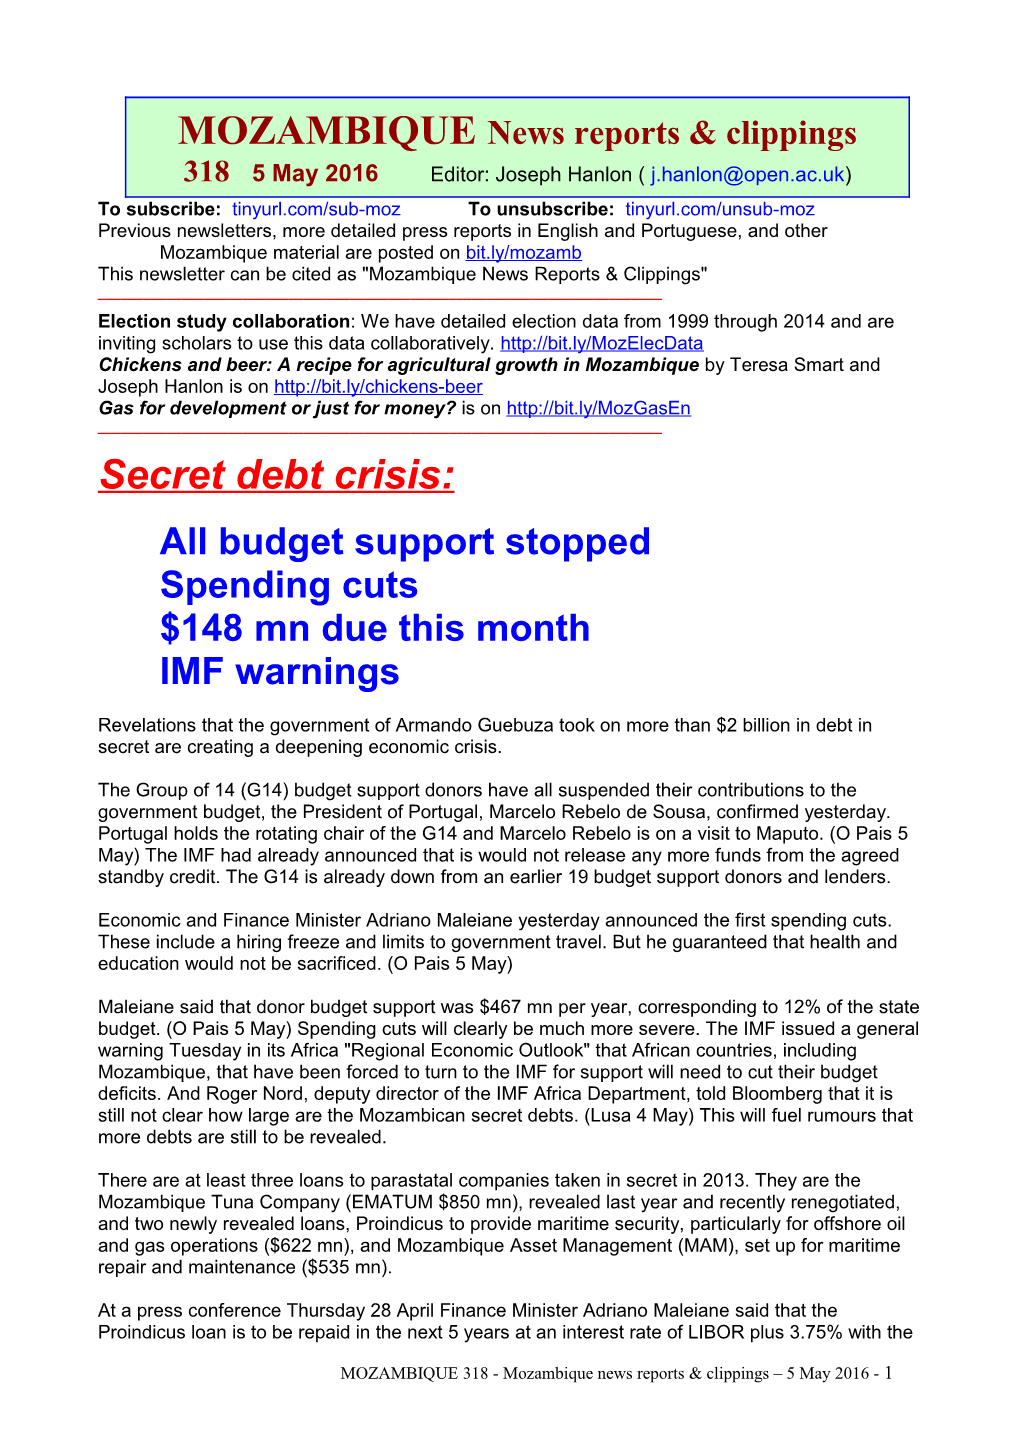 All Budget Support Stopped Spending Cuts $148 Mn Due This Month IMF Warnings